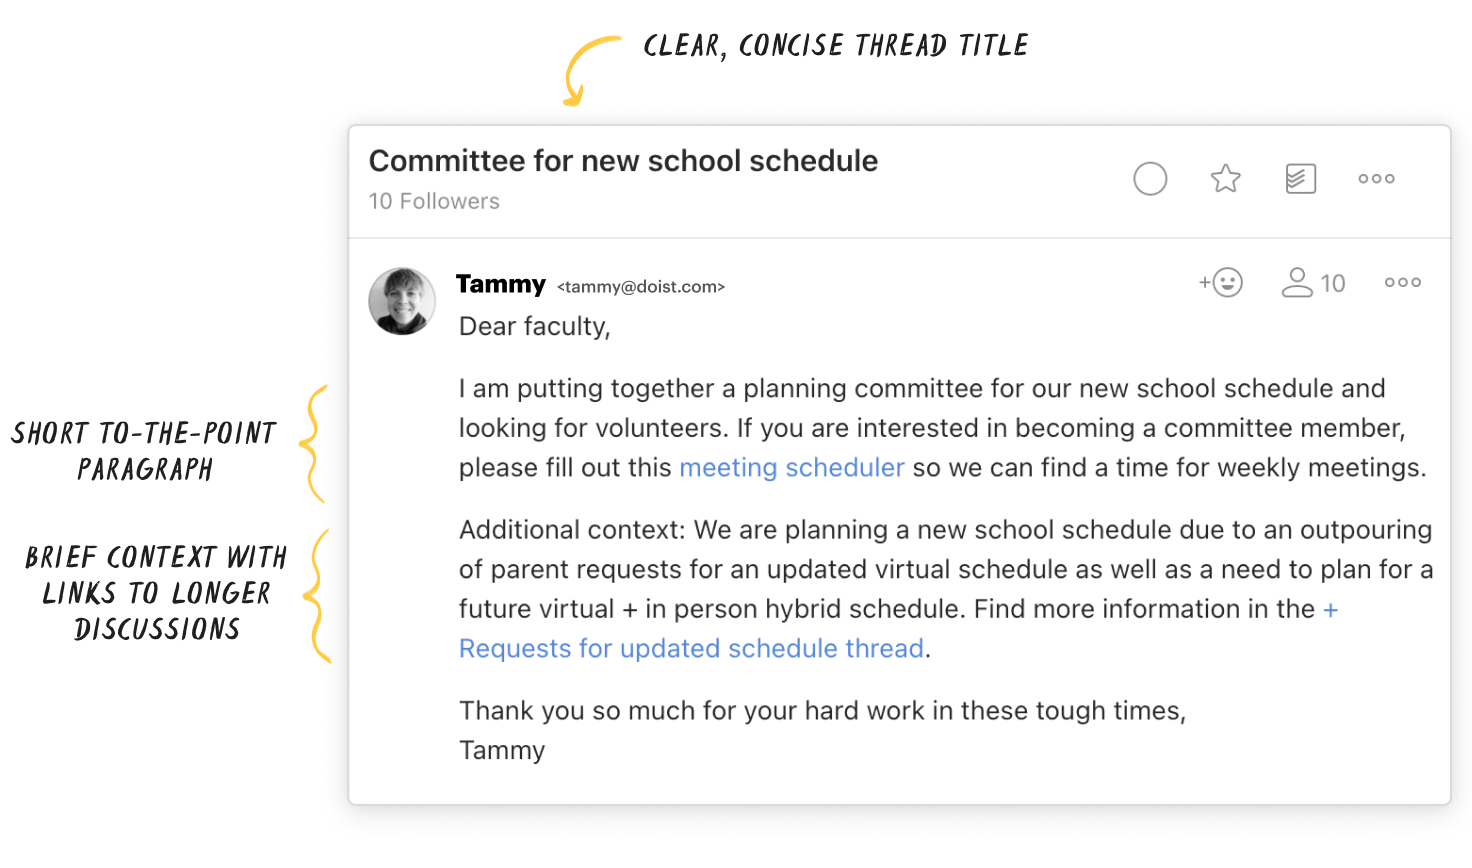 It's a good idea to edit that previous long email into a new one with a clear, concise thread title like "Committee for new school schedule." The text has been edited down quite a lot with a short, to-the-point initial paragraph and brief context with links to longer discussion elsewhere near the end.